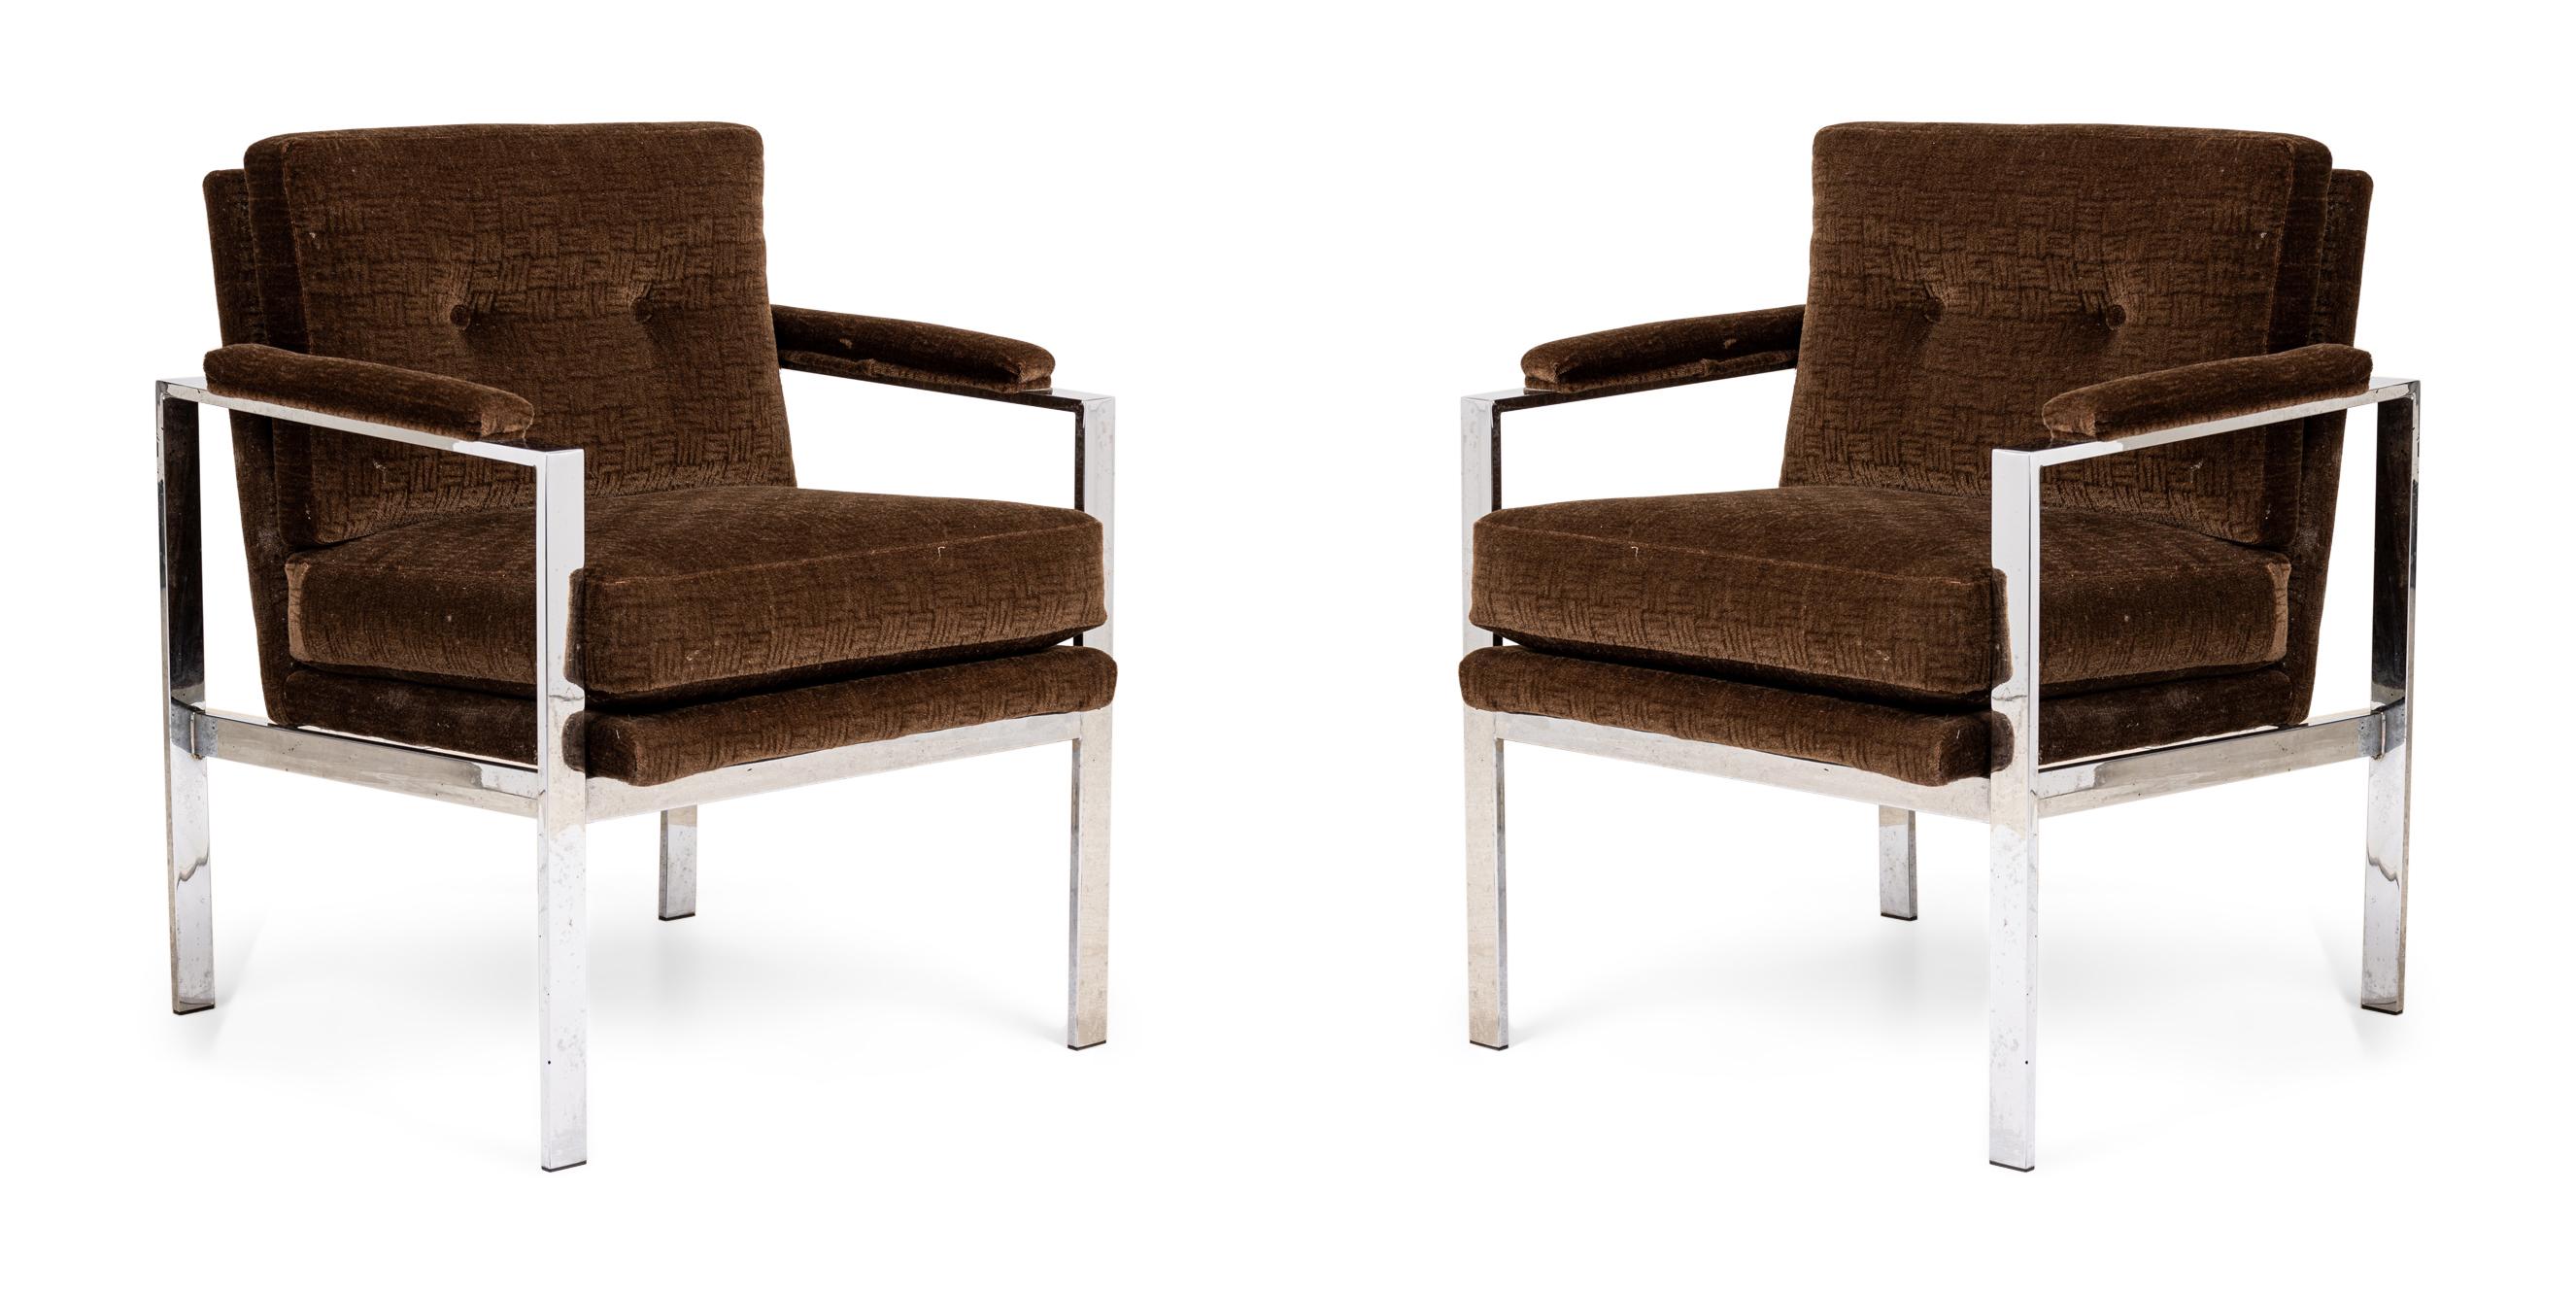 Pair of Milo Baughman Flat Chrome Bar and Brown Fabric Upholstered Armchairs For Sale 4